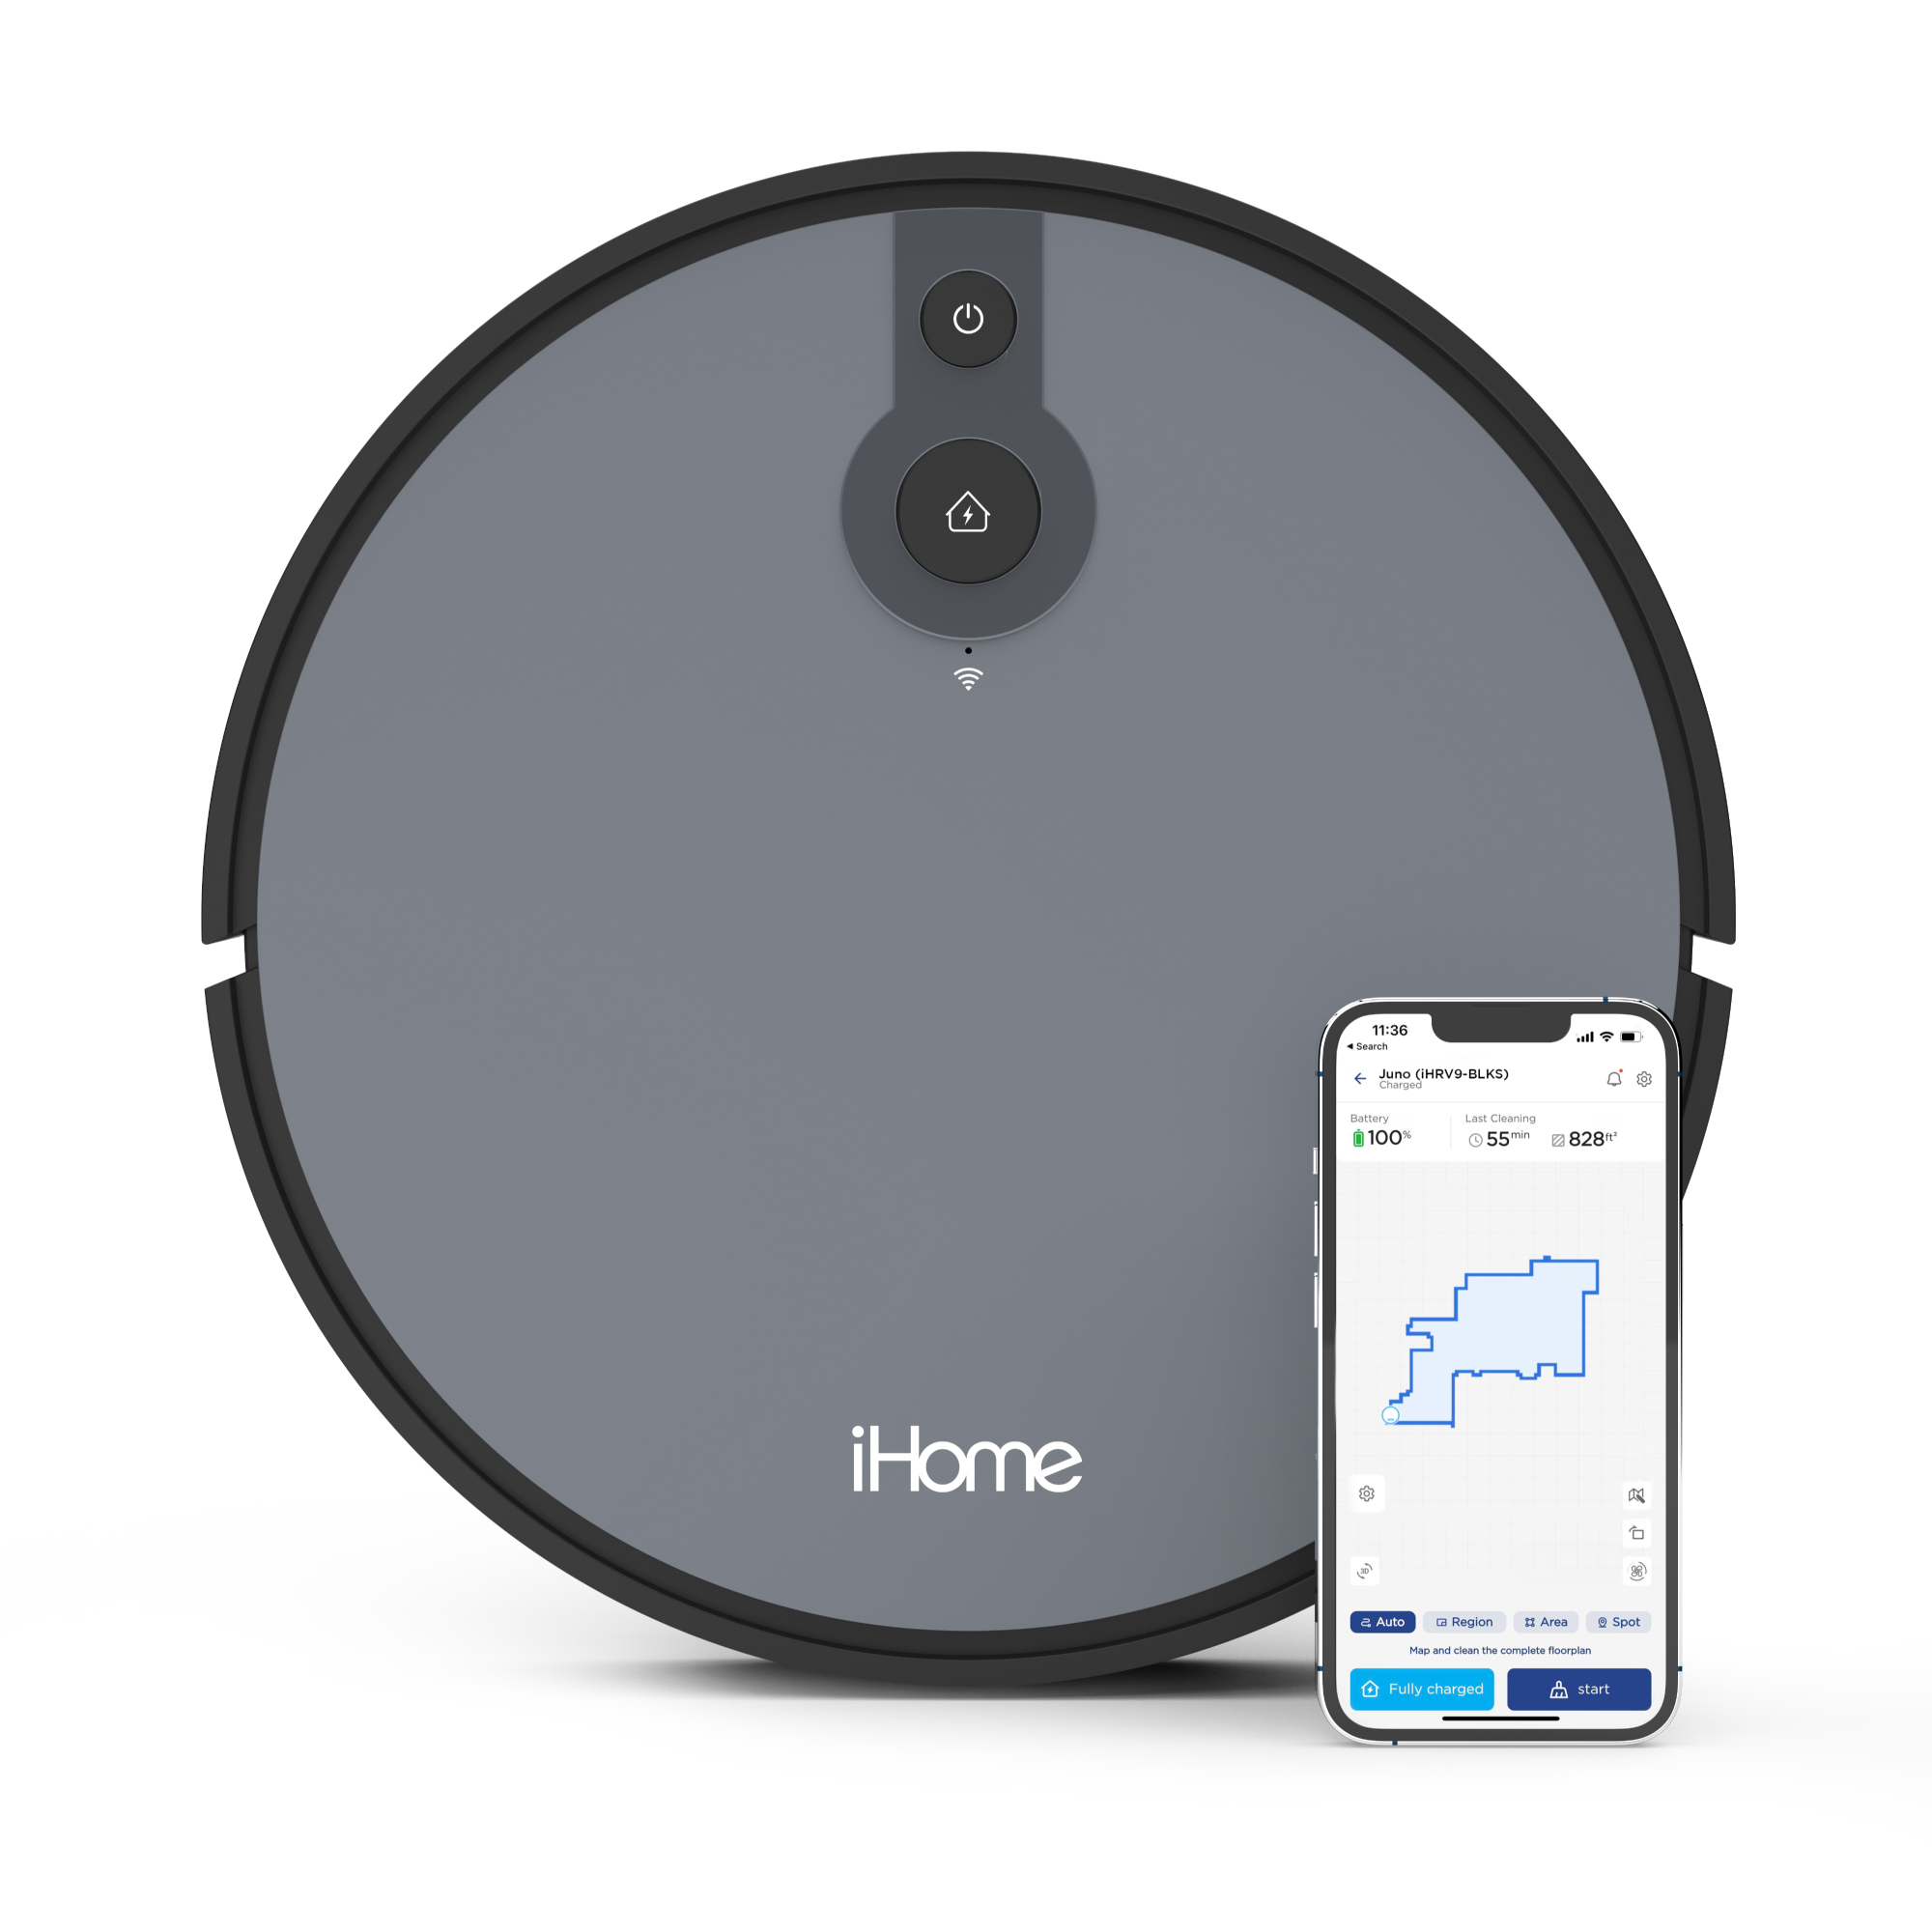 iHome AutoVac Juno Robot Vacuum, Mapping Technology, Strong Suction, 120 Min Runtime, App + Remote Control, New - image 1 of 11